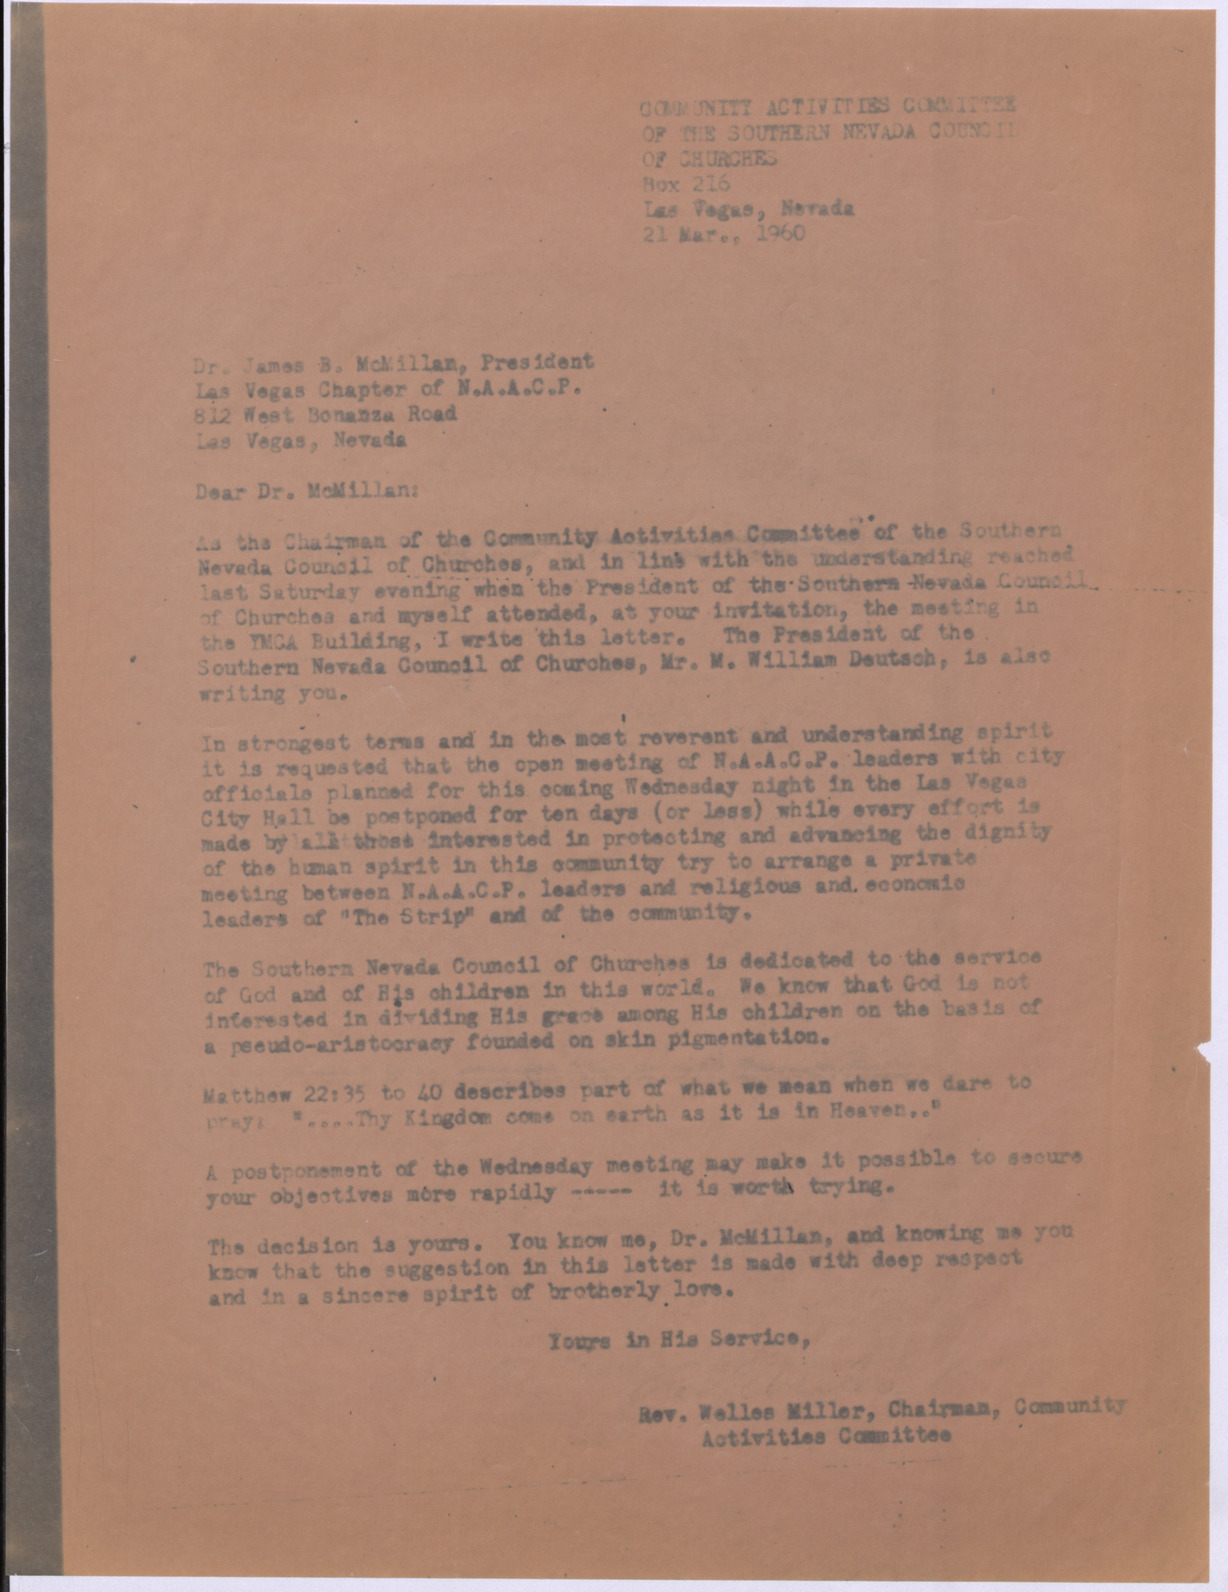 Letter to James B. McMillan from Rev. Welles Miller, March 21, 1960